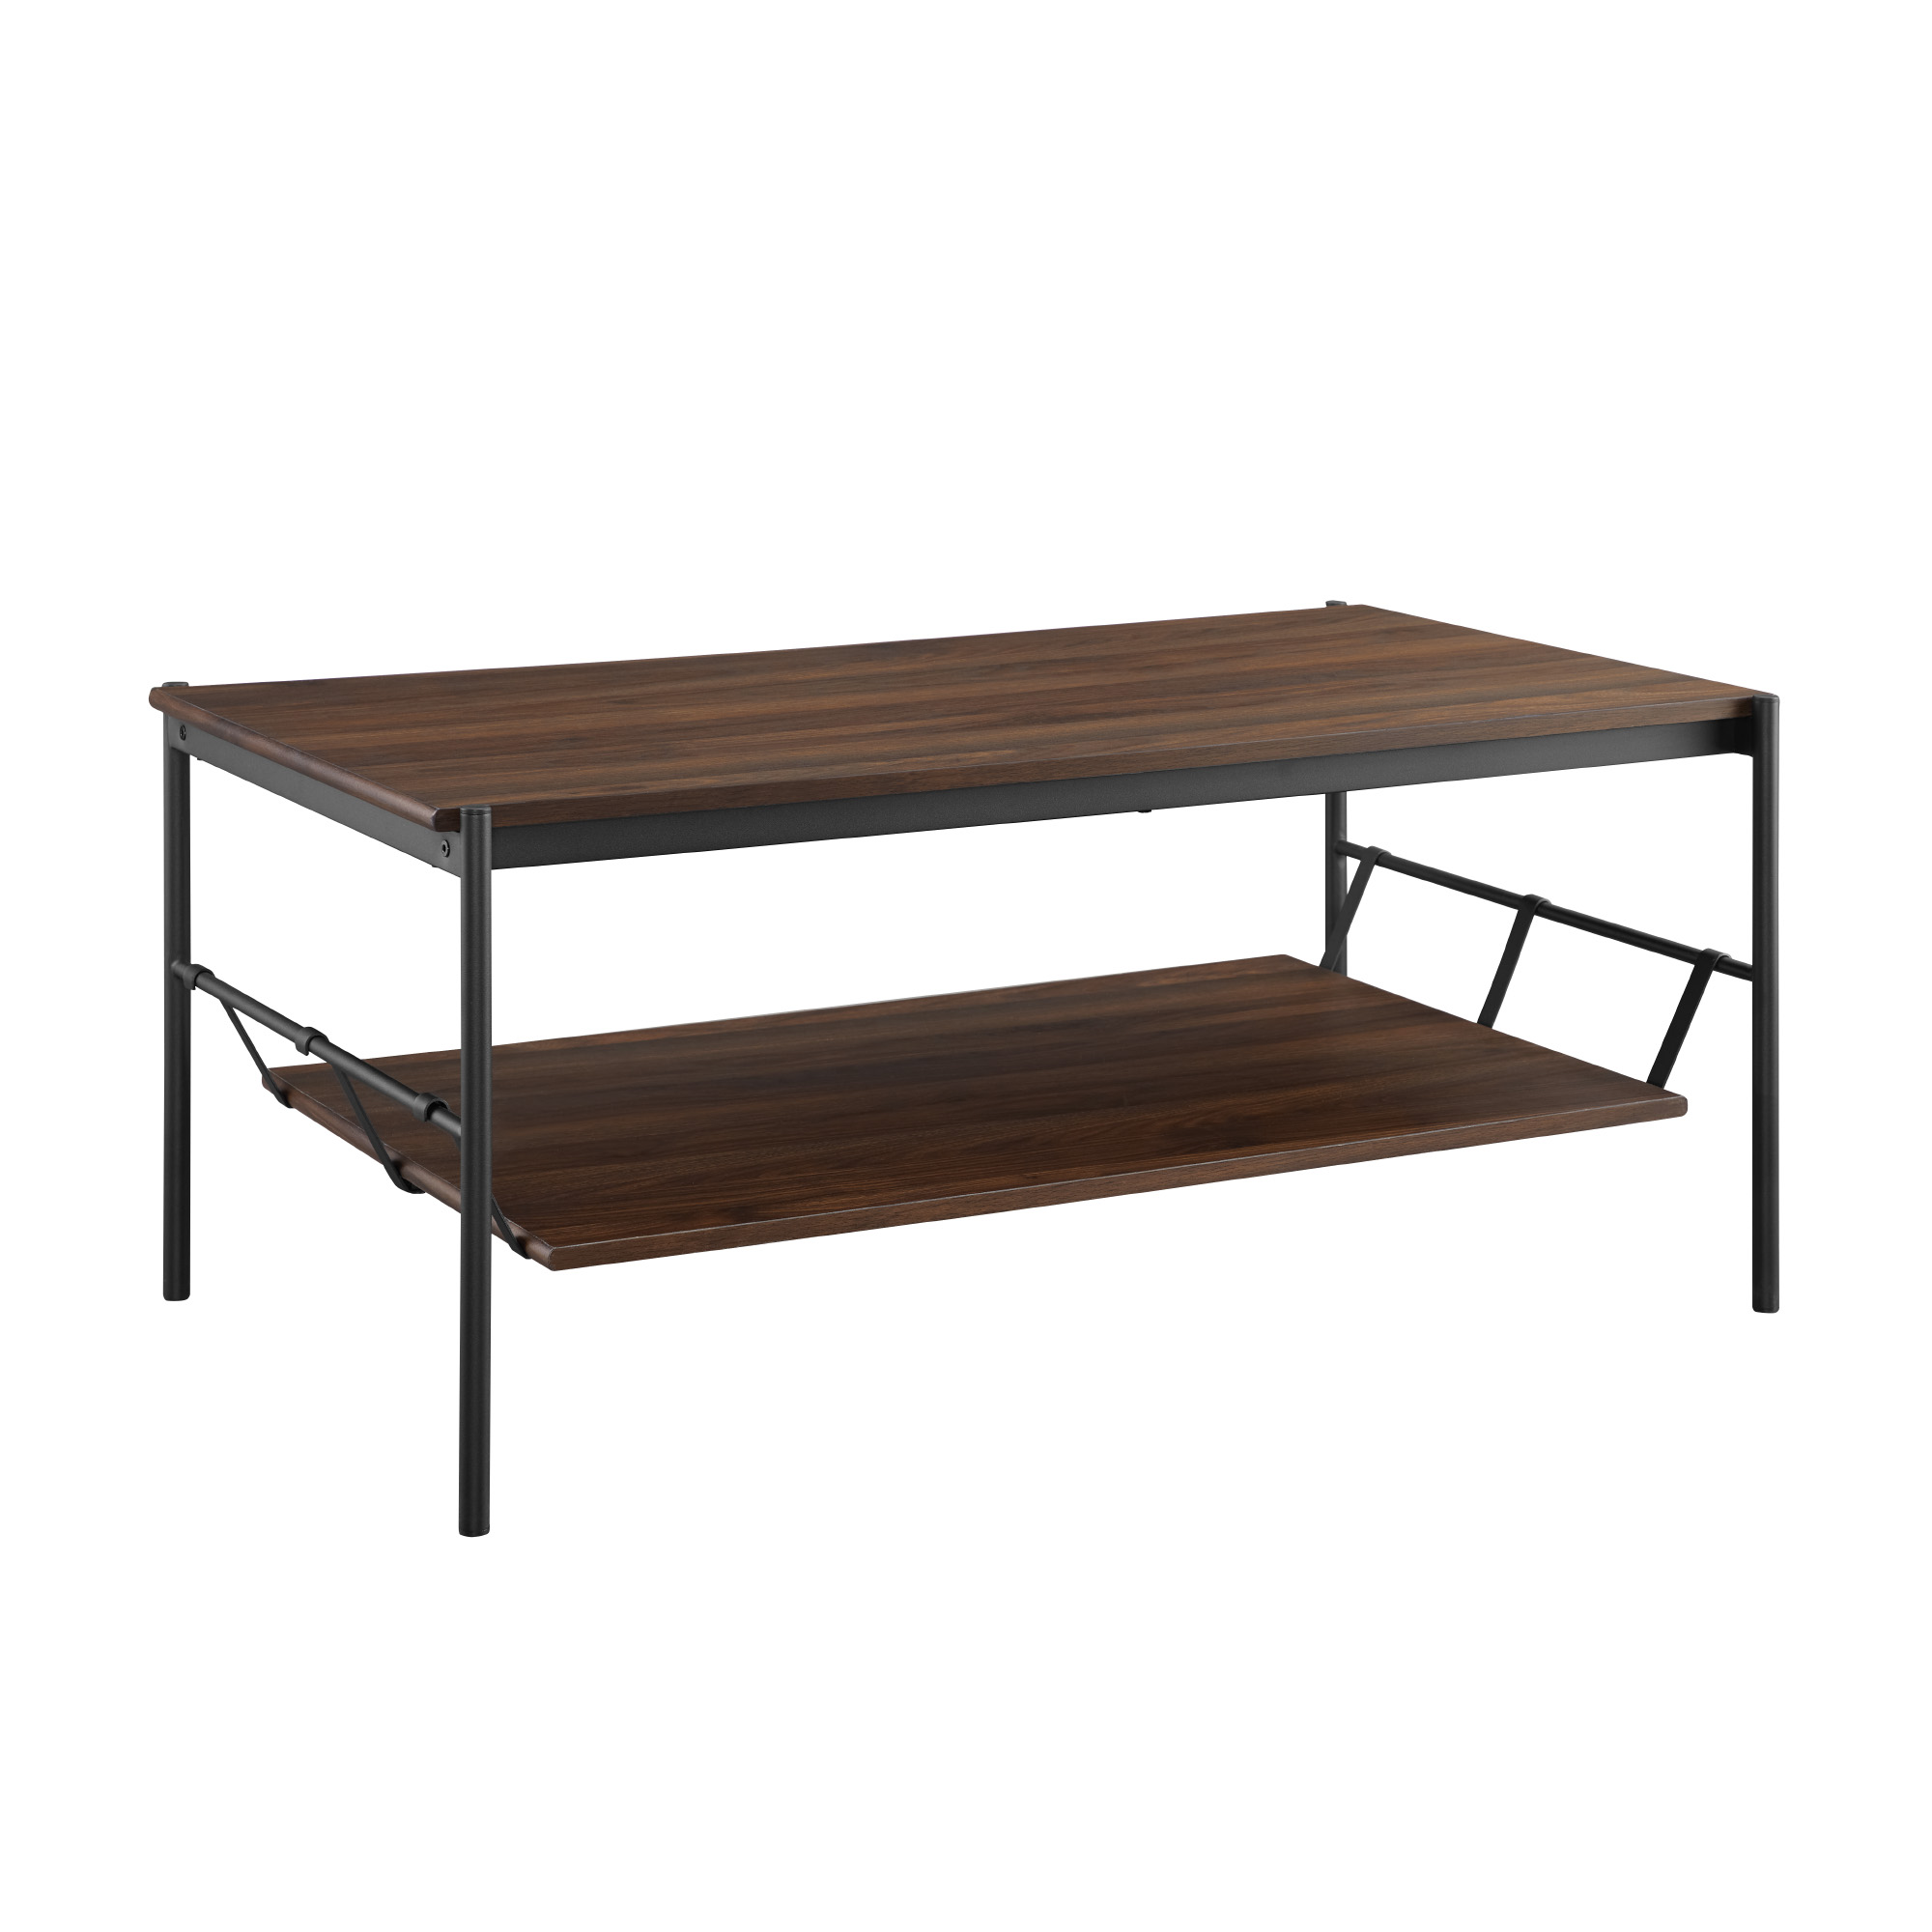 Manor Park Modern Coffee Table with Removable Shelf, Dark Walnut - image 3 of 6